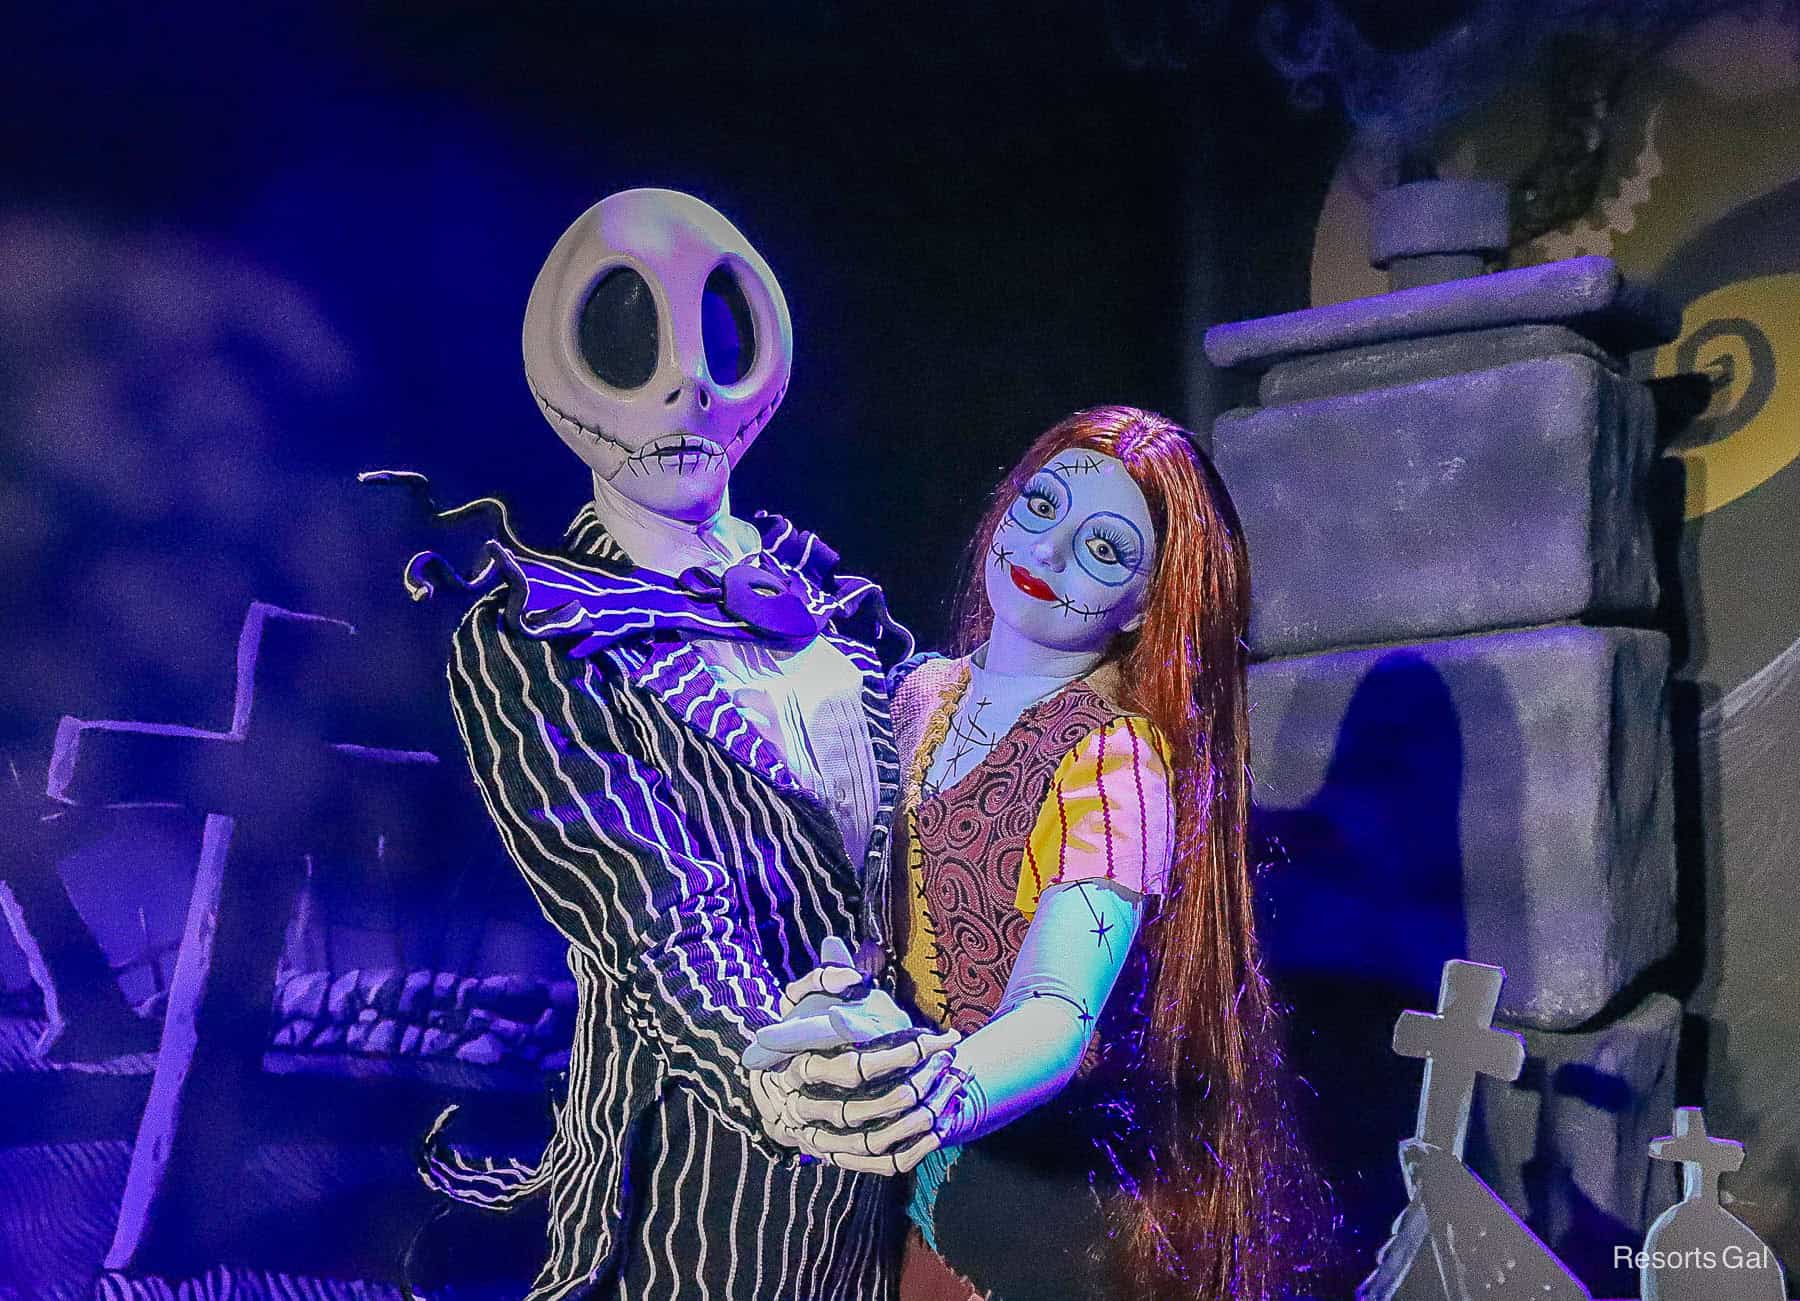 Jack and Sally from The Nightmare Before Christmas greet guests at Mickey's Not So Scary Halloween Party 